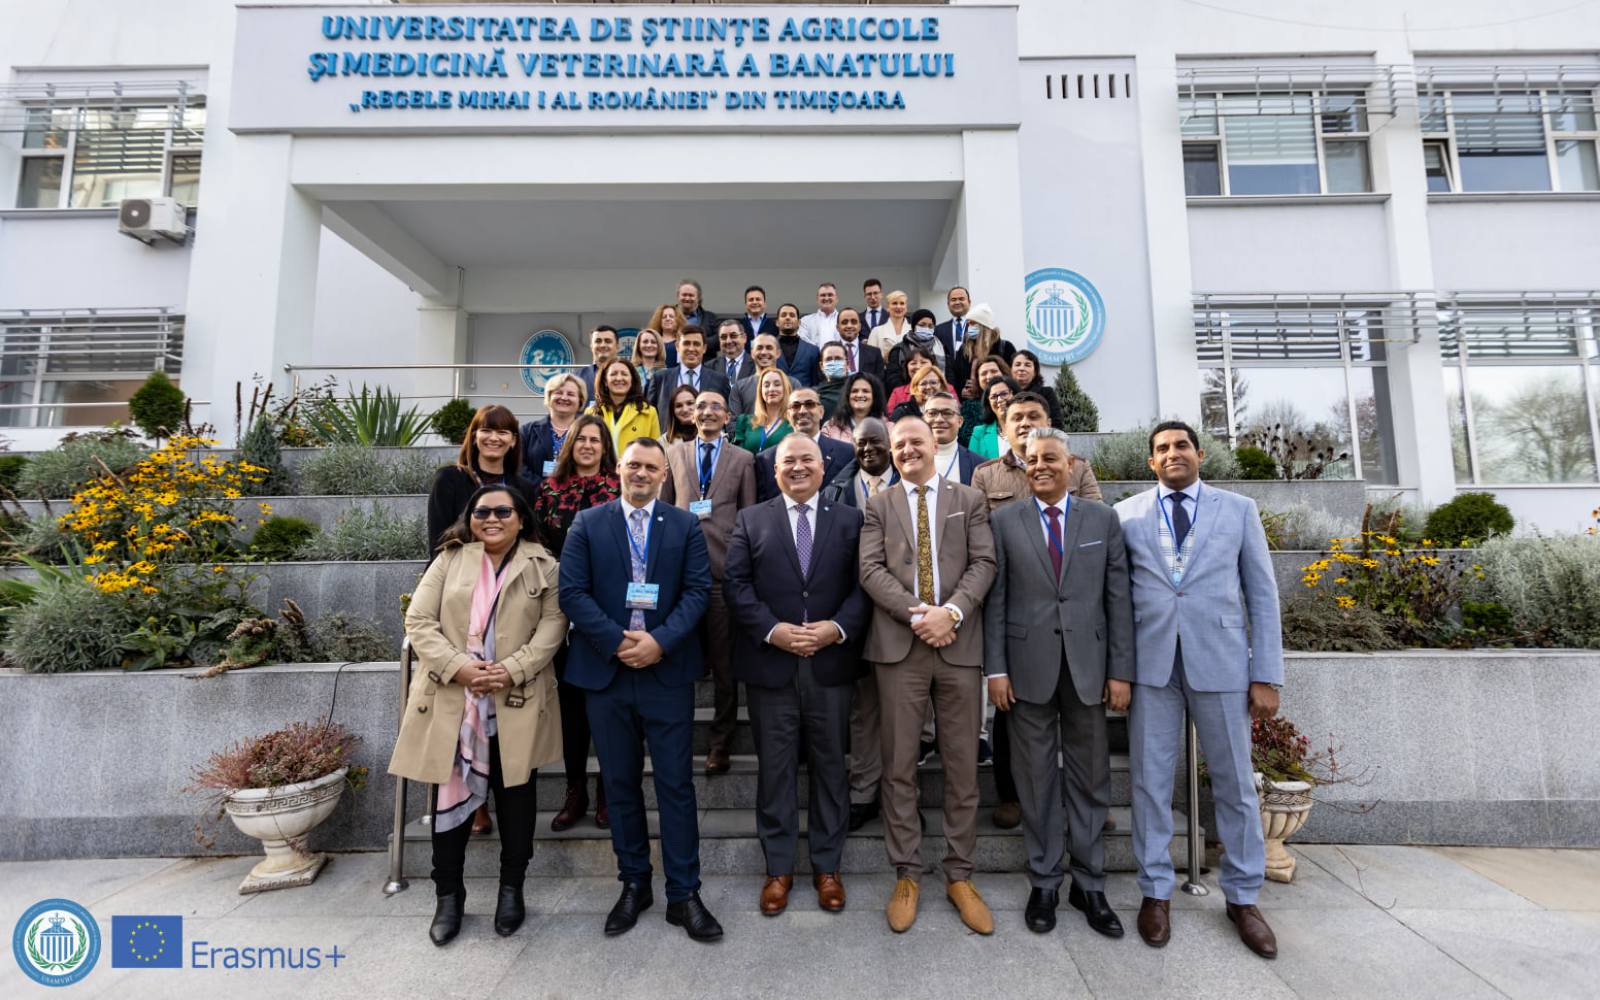 Erasmus+ International Cooperation Conference was held by Banat University of Agricultural Sciences and Veterinary Medicine Timisoara, in the period from 22 to 26 of November 2021.